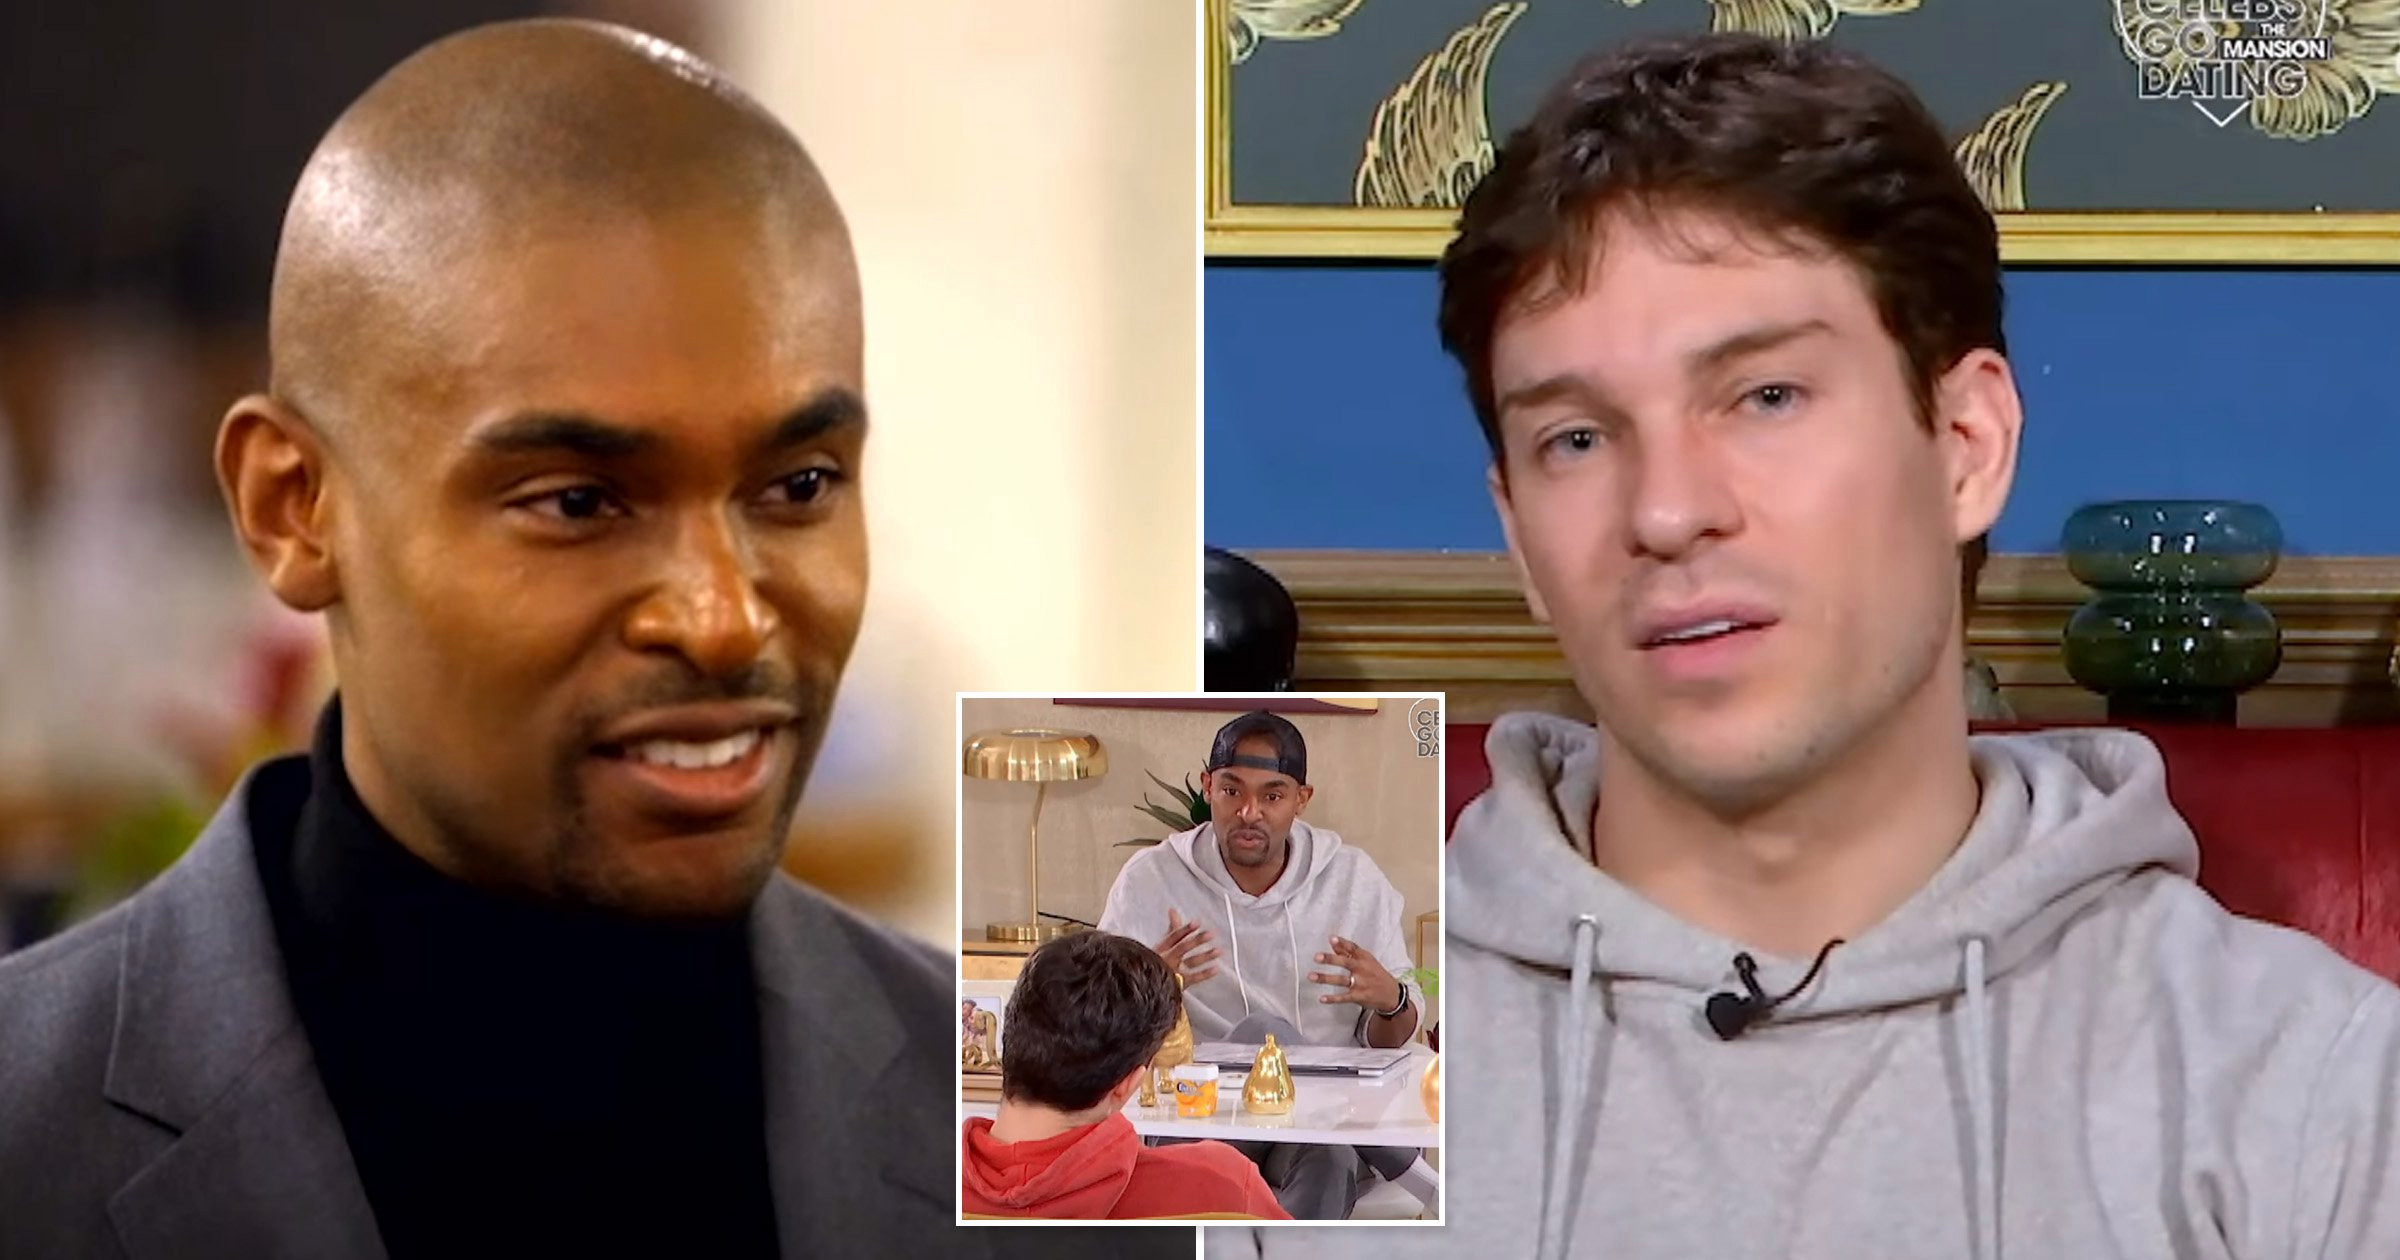 Celebs Go Dating’s Joey Essex in unaired ‘row’ with Paul Carrick Brunson after making ‘insensitive’ comment